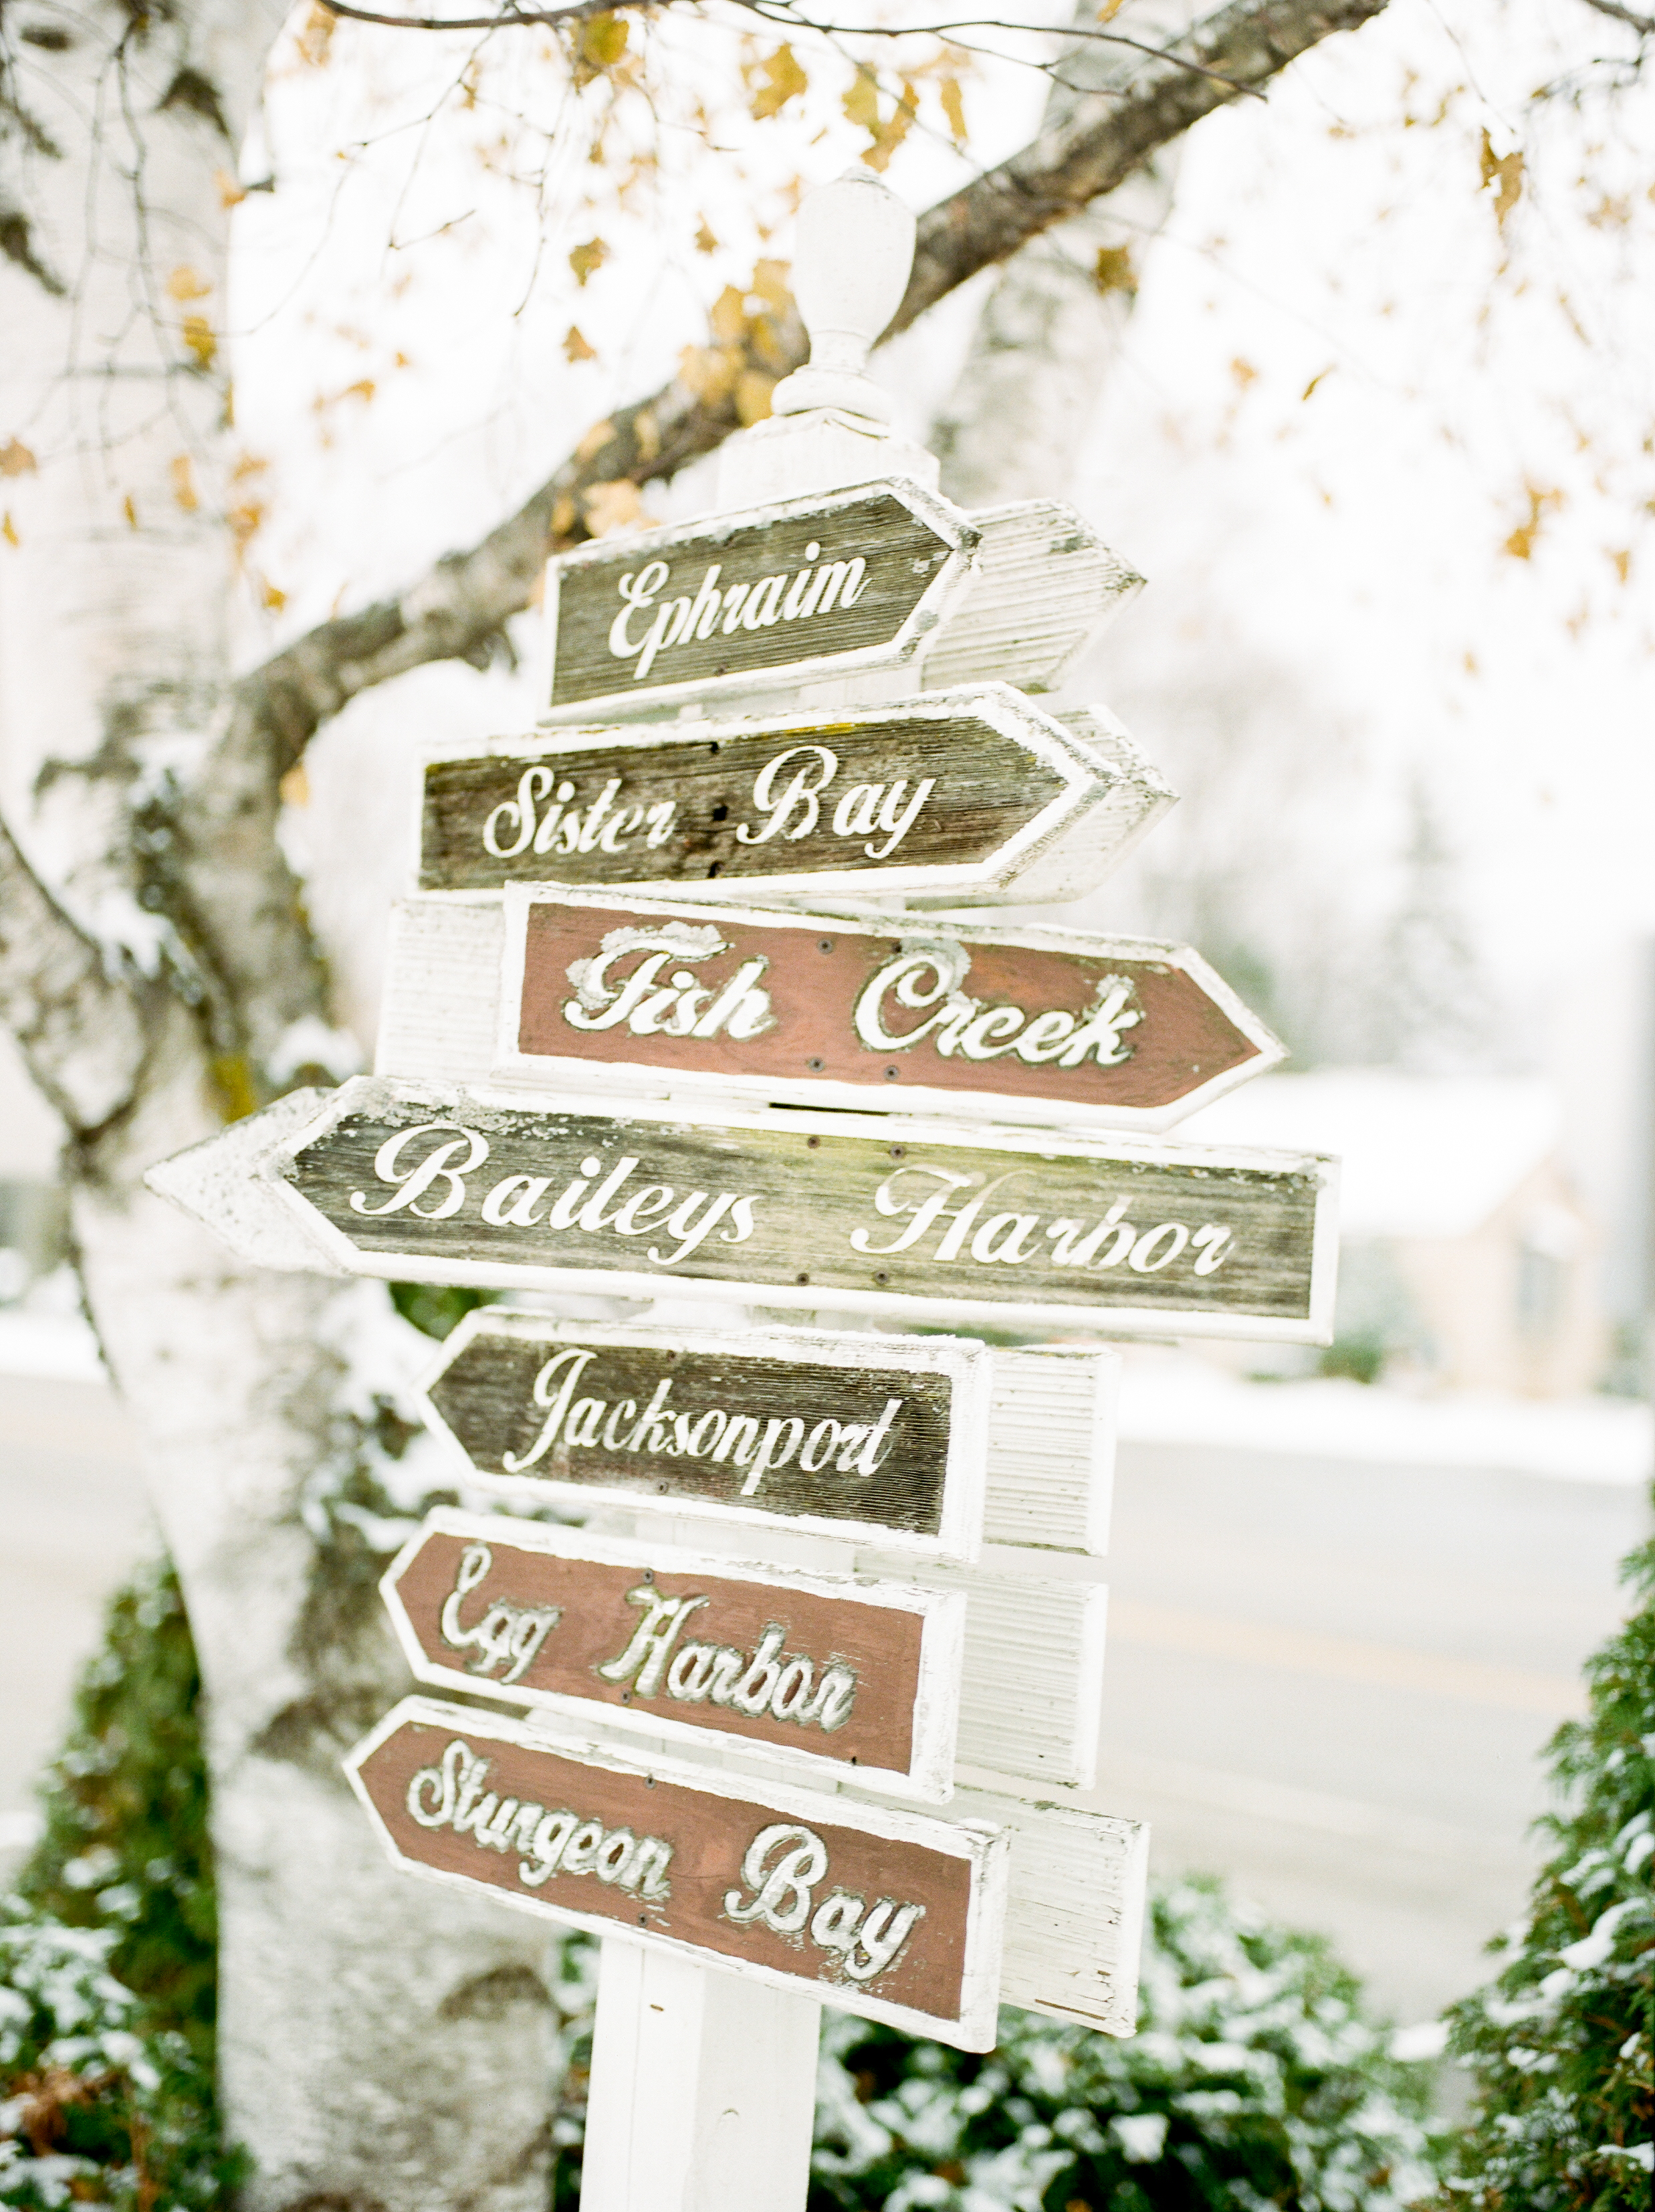 Door County in winter | Photo of a sign displaying the Door County towns of Ephraim, Sister Bay, Fish Creek, Bailey's Harbor, Jacksonport, Egg Harbor and Sturgeon Bay